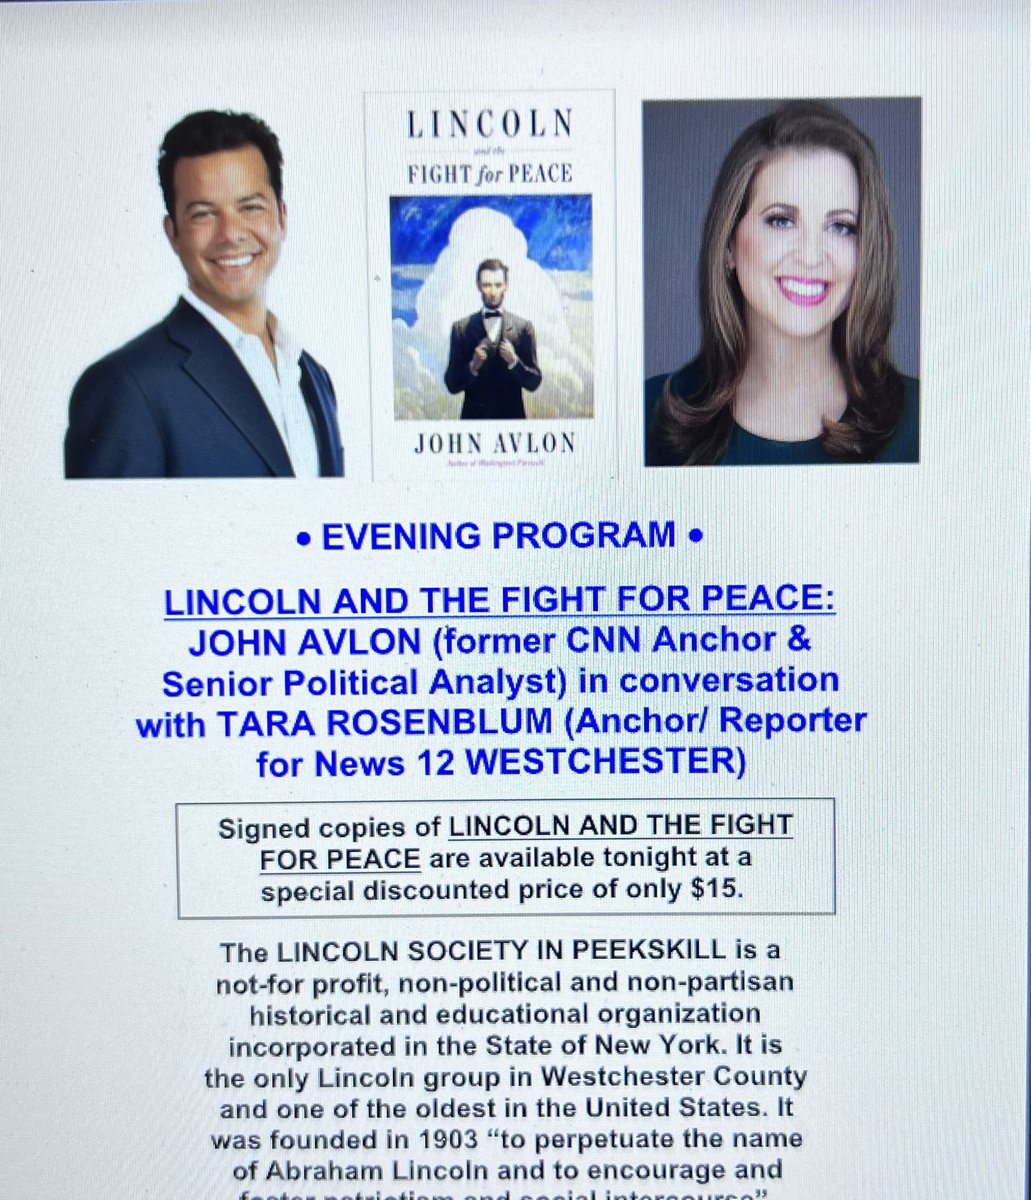 🇺🇸 Sandwiched between an earthquake & an eclipse, a fascinating dose of history! 🇺🇸 moderated a conversation w/ John Avlon at the ‘Lincoln Society Annual Dinner Gala' last night & learned some amazing stories about our 16th US President that are relevant today! @JohnAvlon @News12